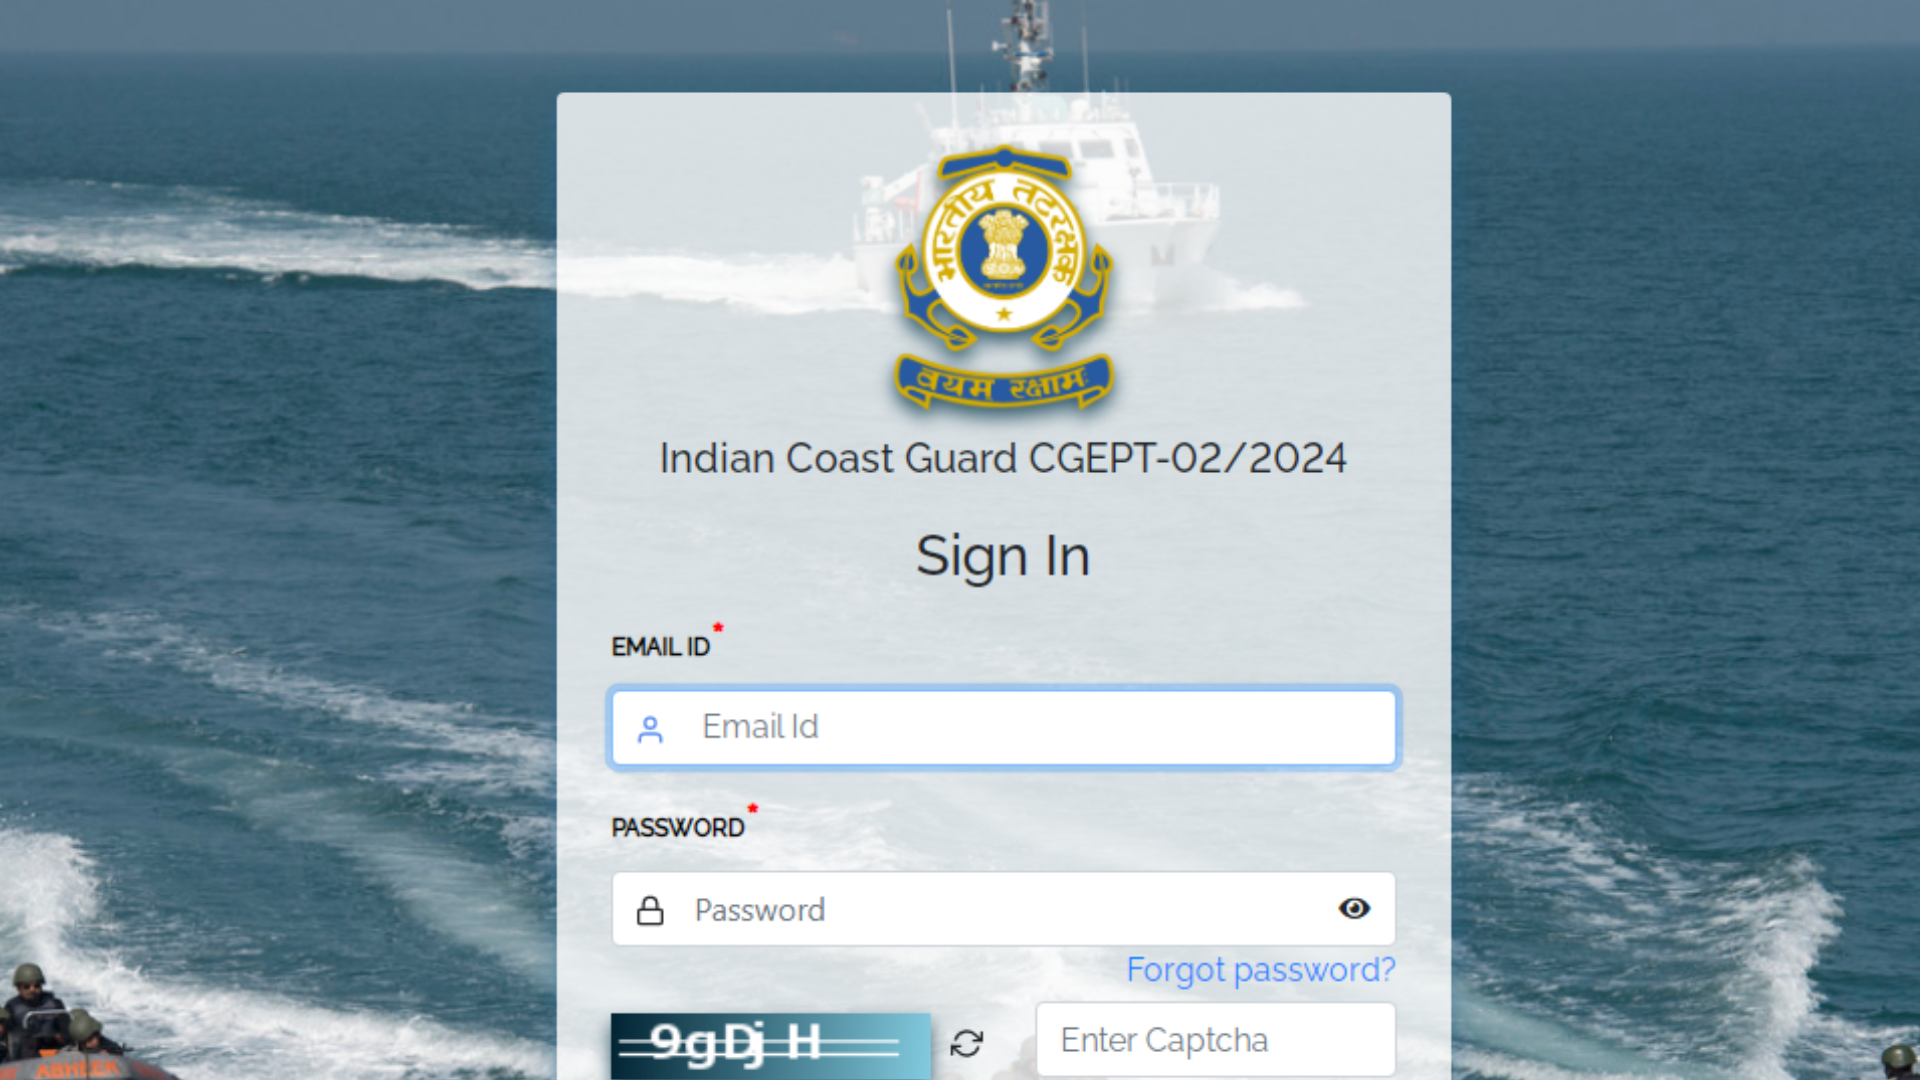 Coast Guard Navik General Duty CGEPT 02/2024 Recruitment Exam Date / City / Admit Card for 260 Post